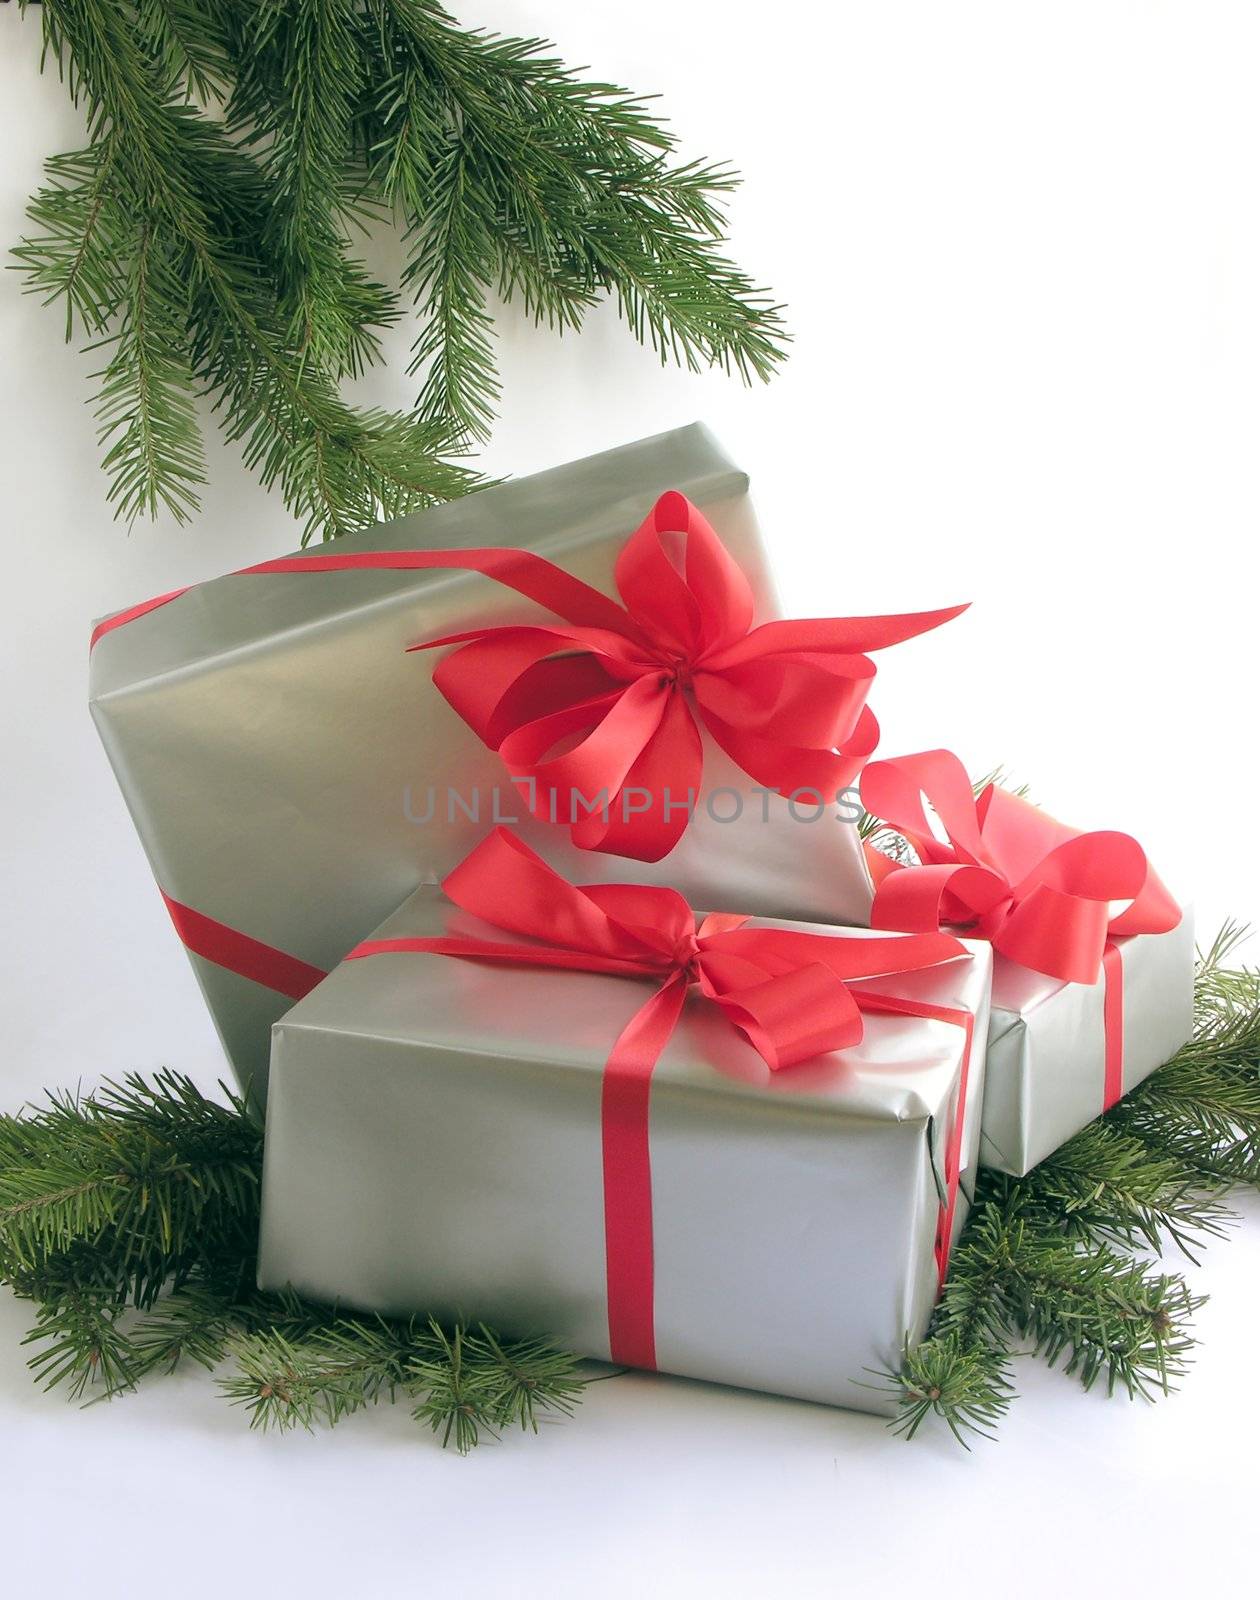 Christmas gifts in silver paper by RAIMA